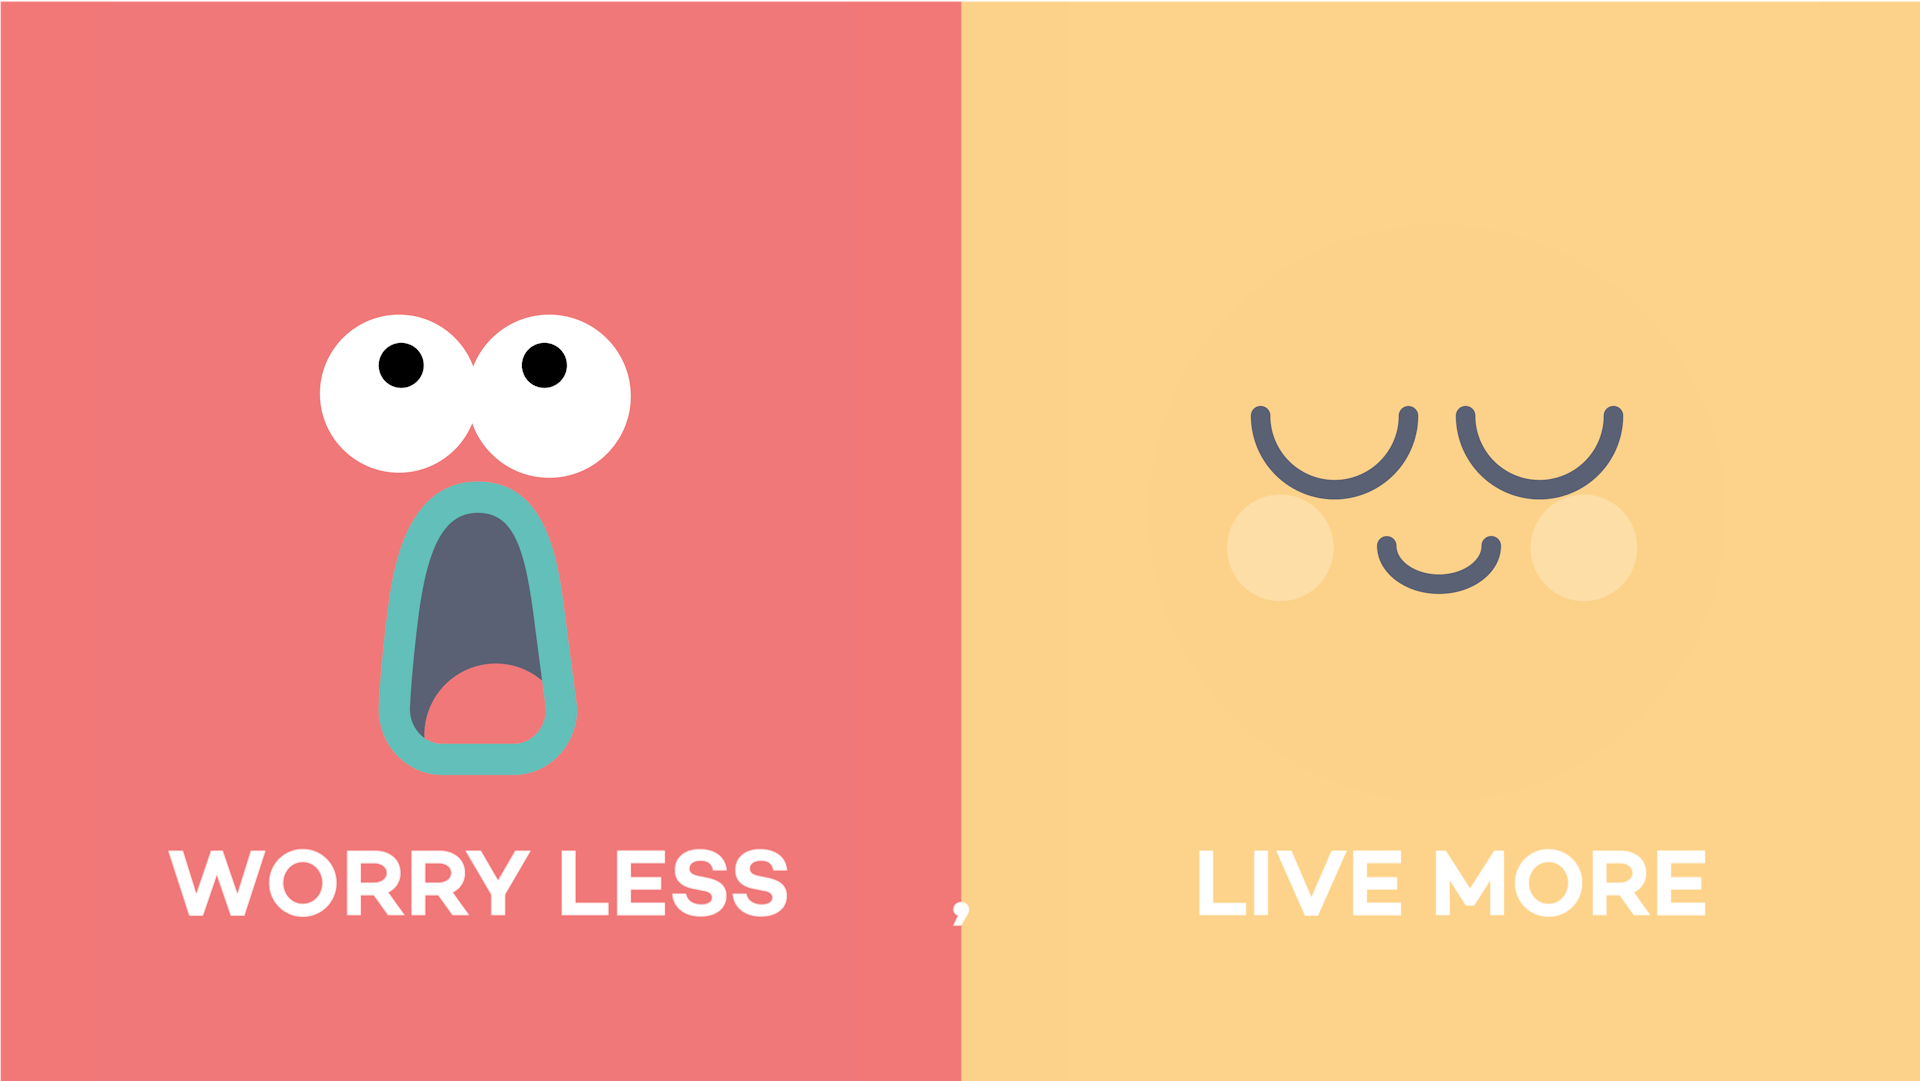 visualization about the goal of the spirit application: worry less, live more